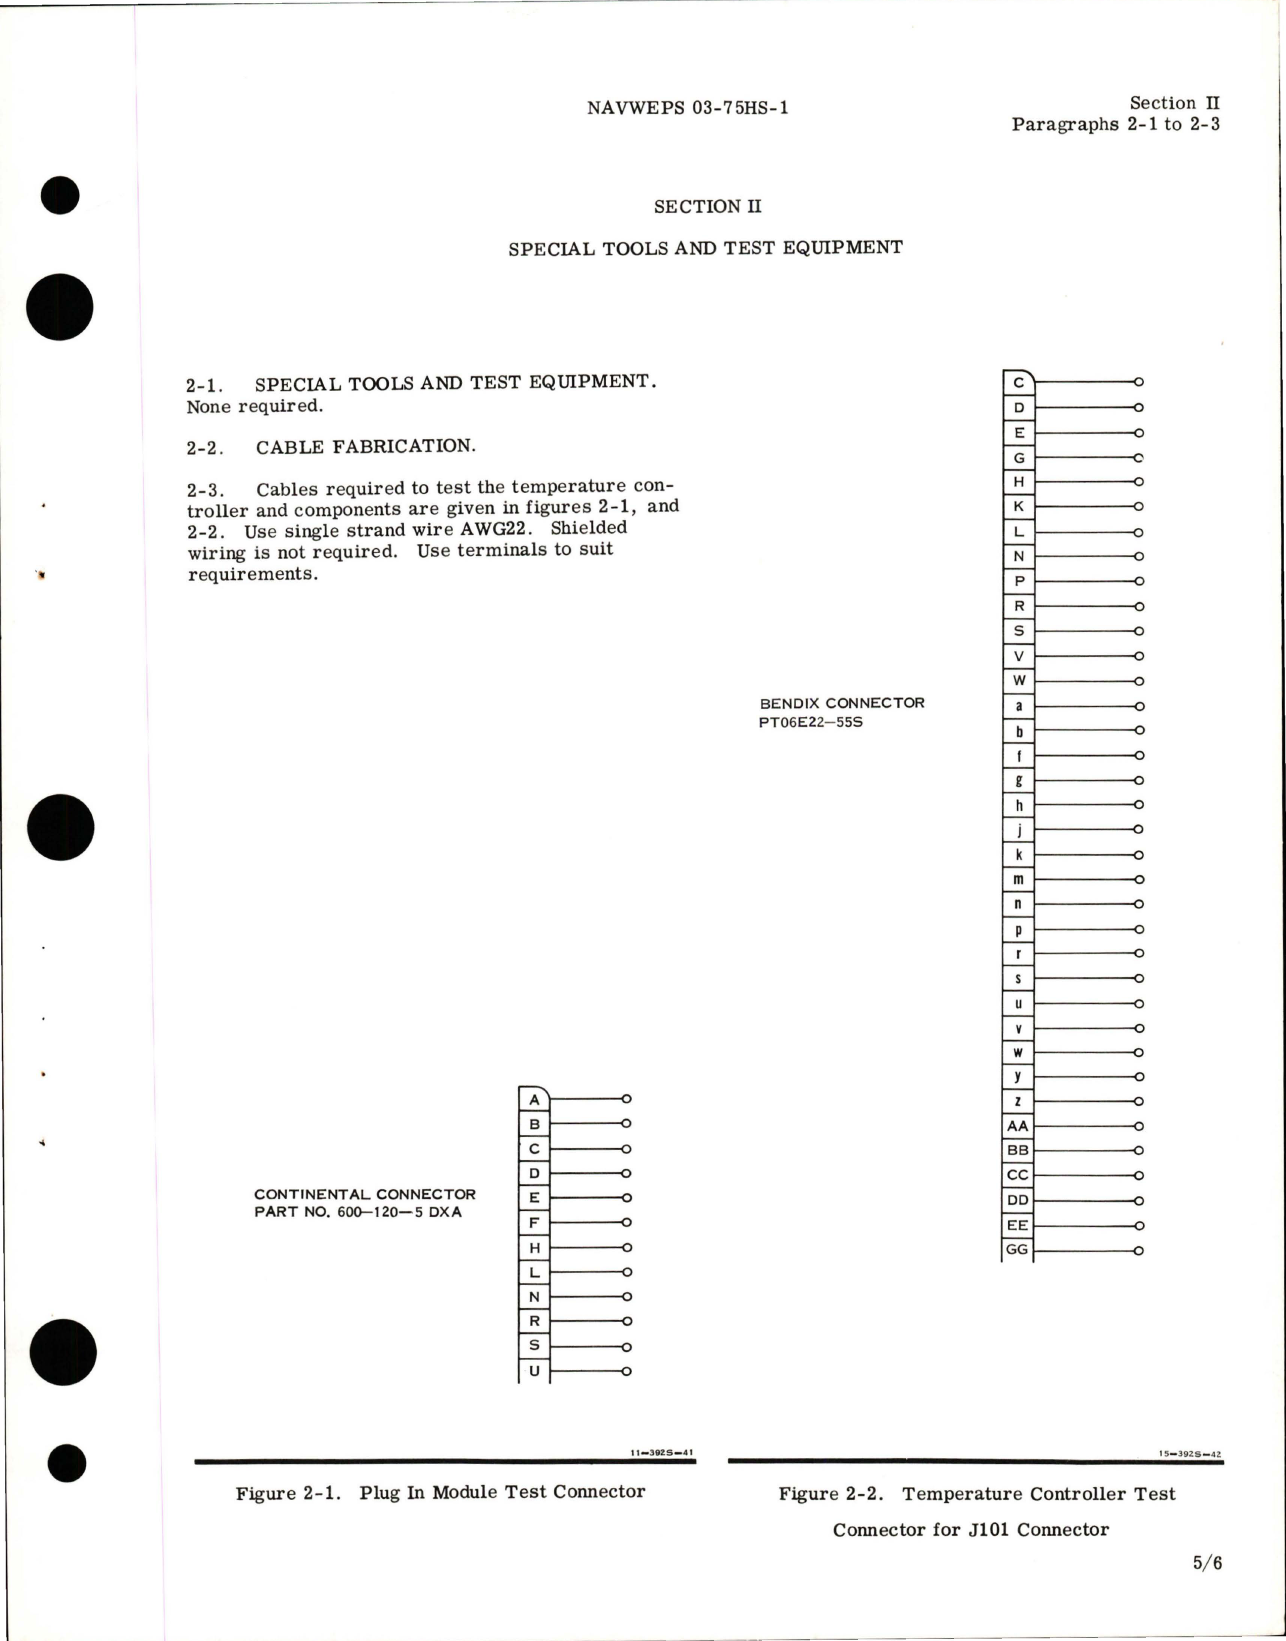 Sample page 9 from AirCorps Library document: Overhaul Instructions for Temperature Controller - Parts 588531-3 and 588531-5